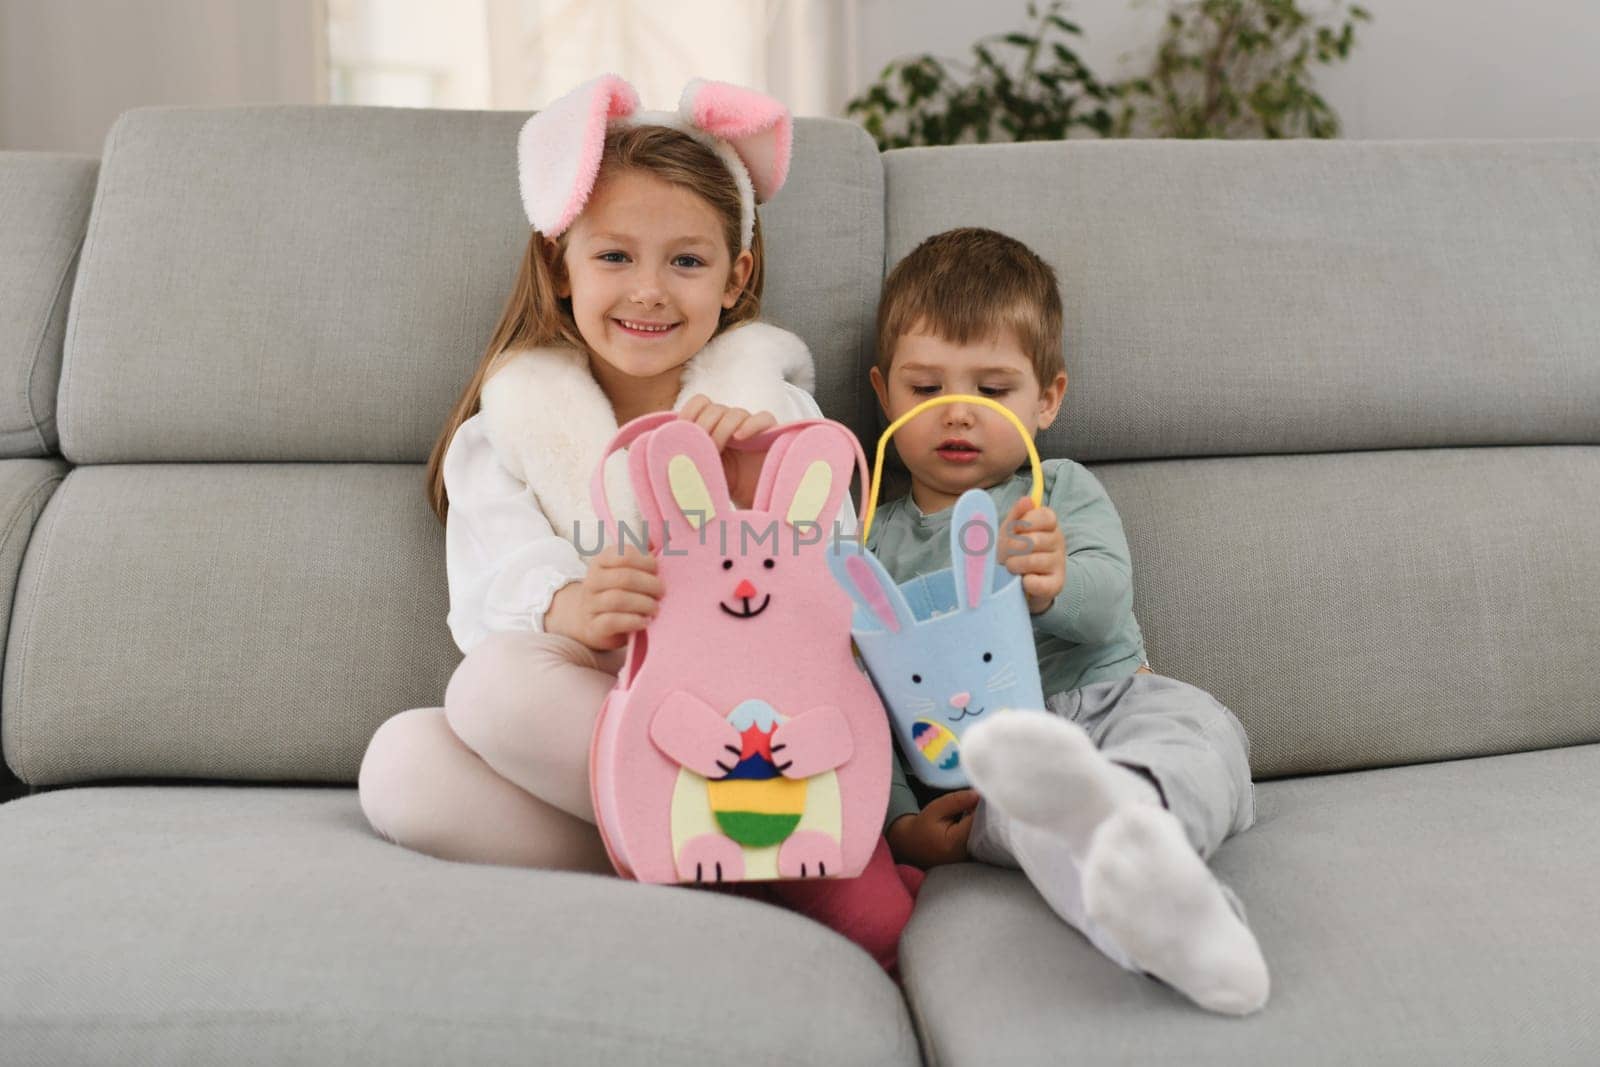 The kids with bunny ears and basket for chocolate eggs